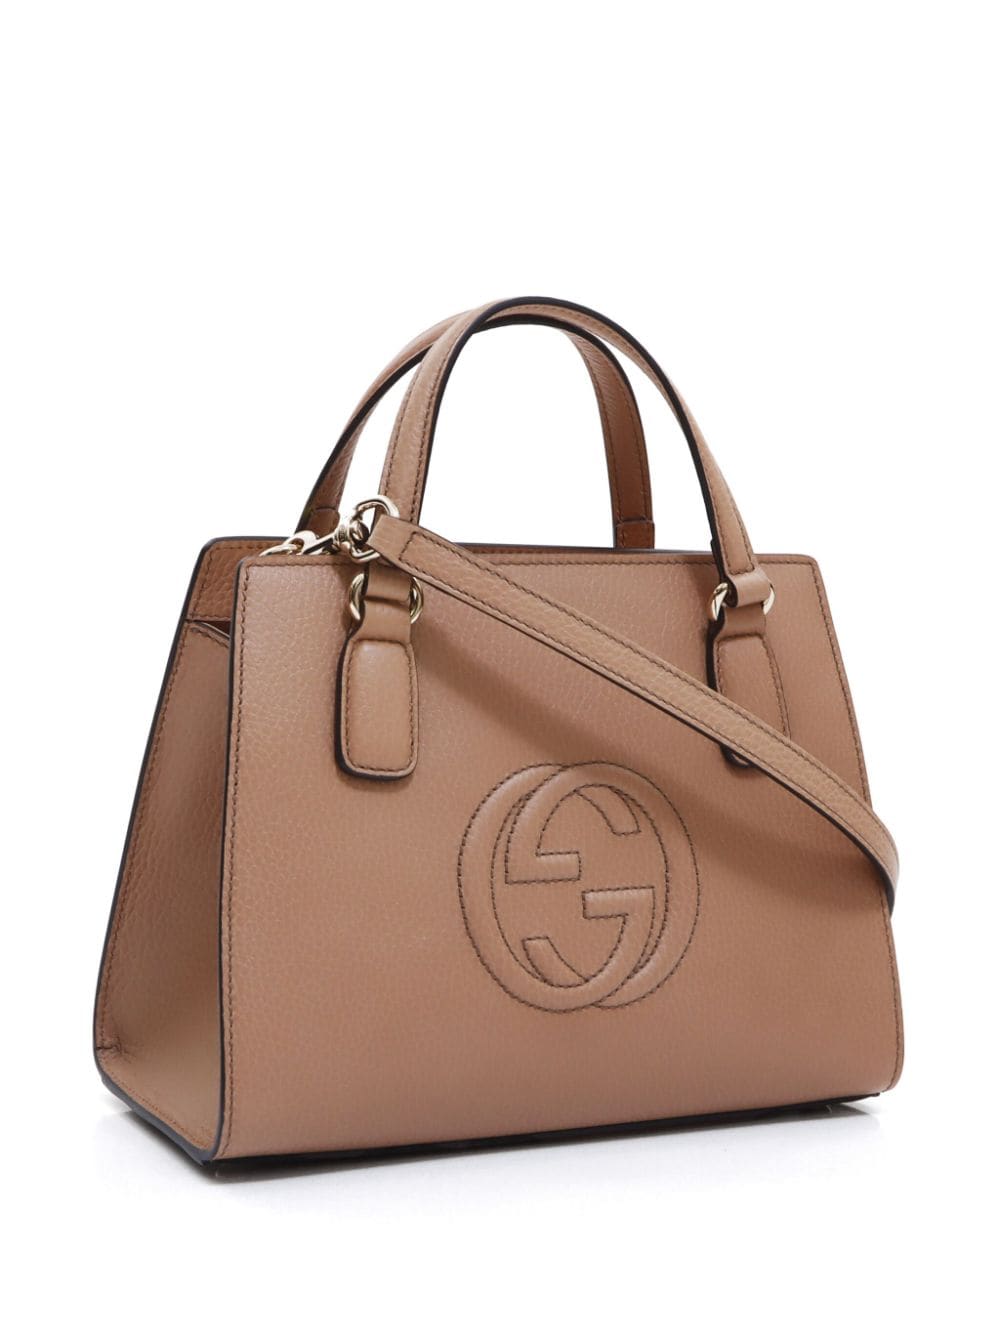 Pre-owned Gucci Soho Leather Handbag In 中性色